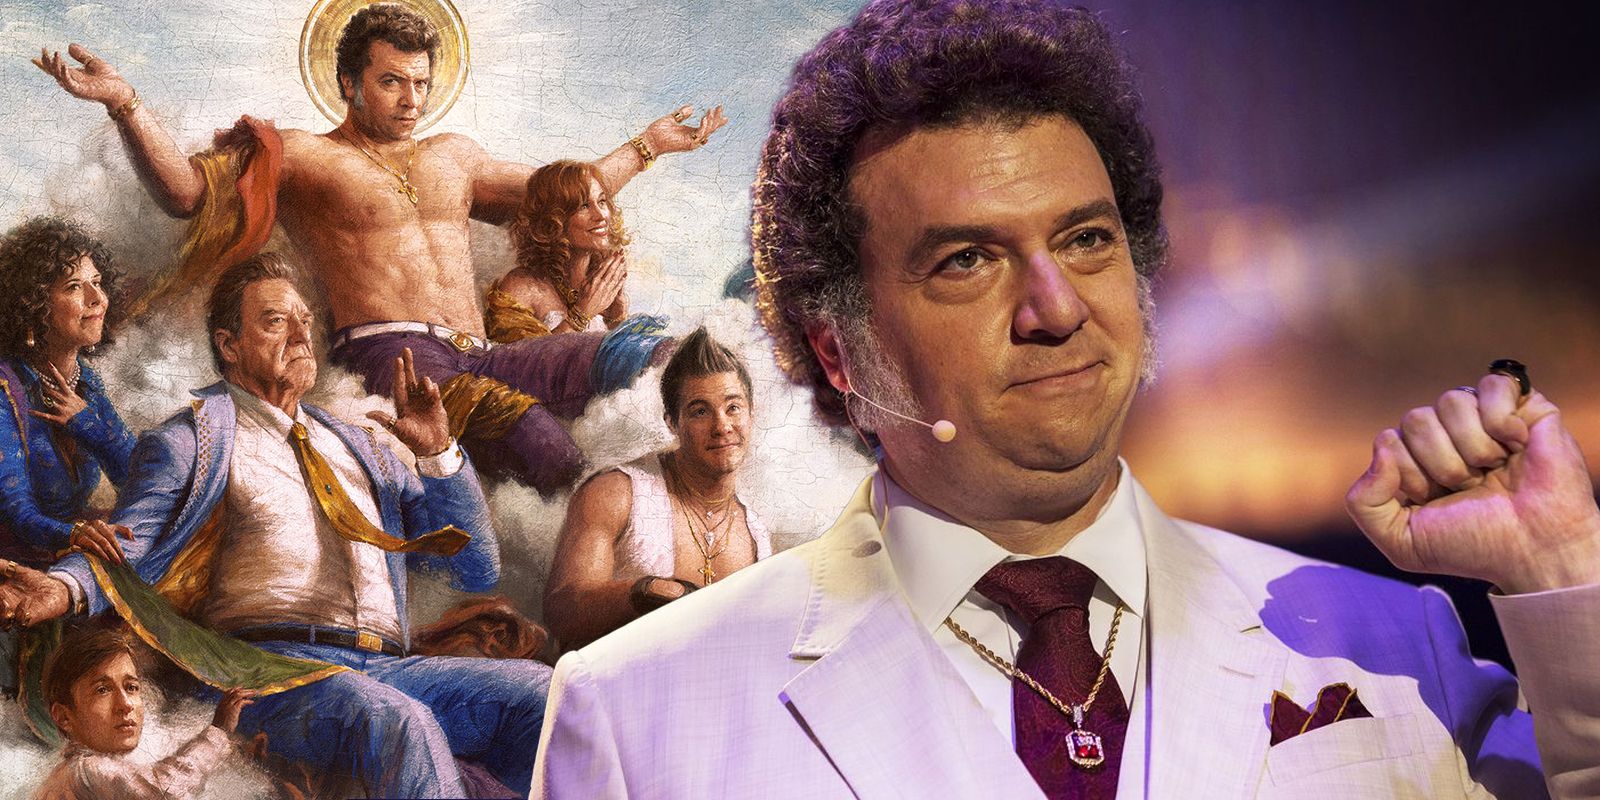 Danny McBride and The Righteous Gemstones.